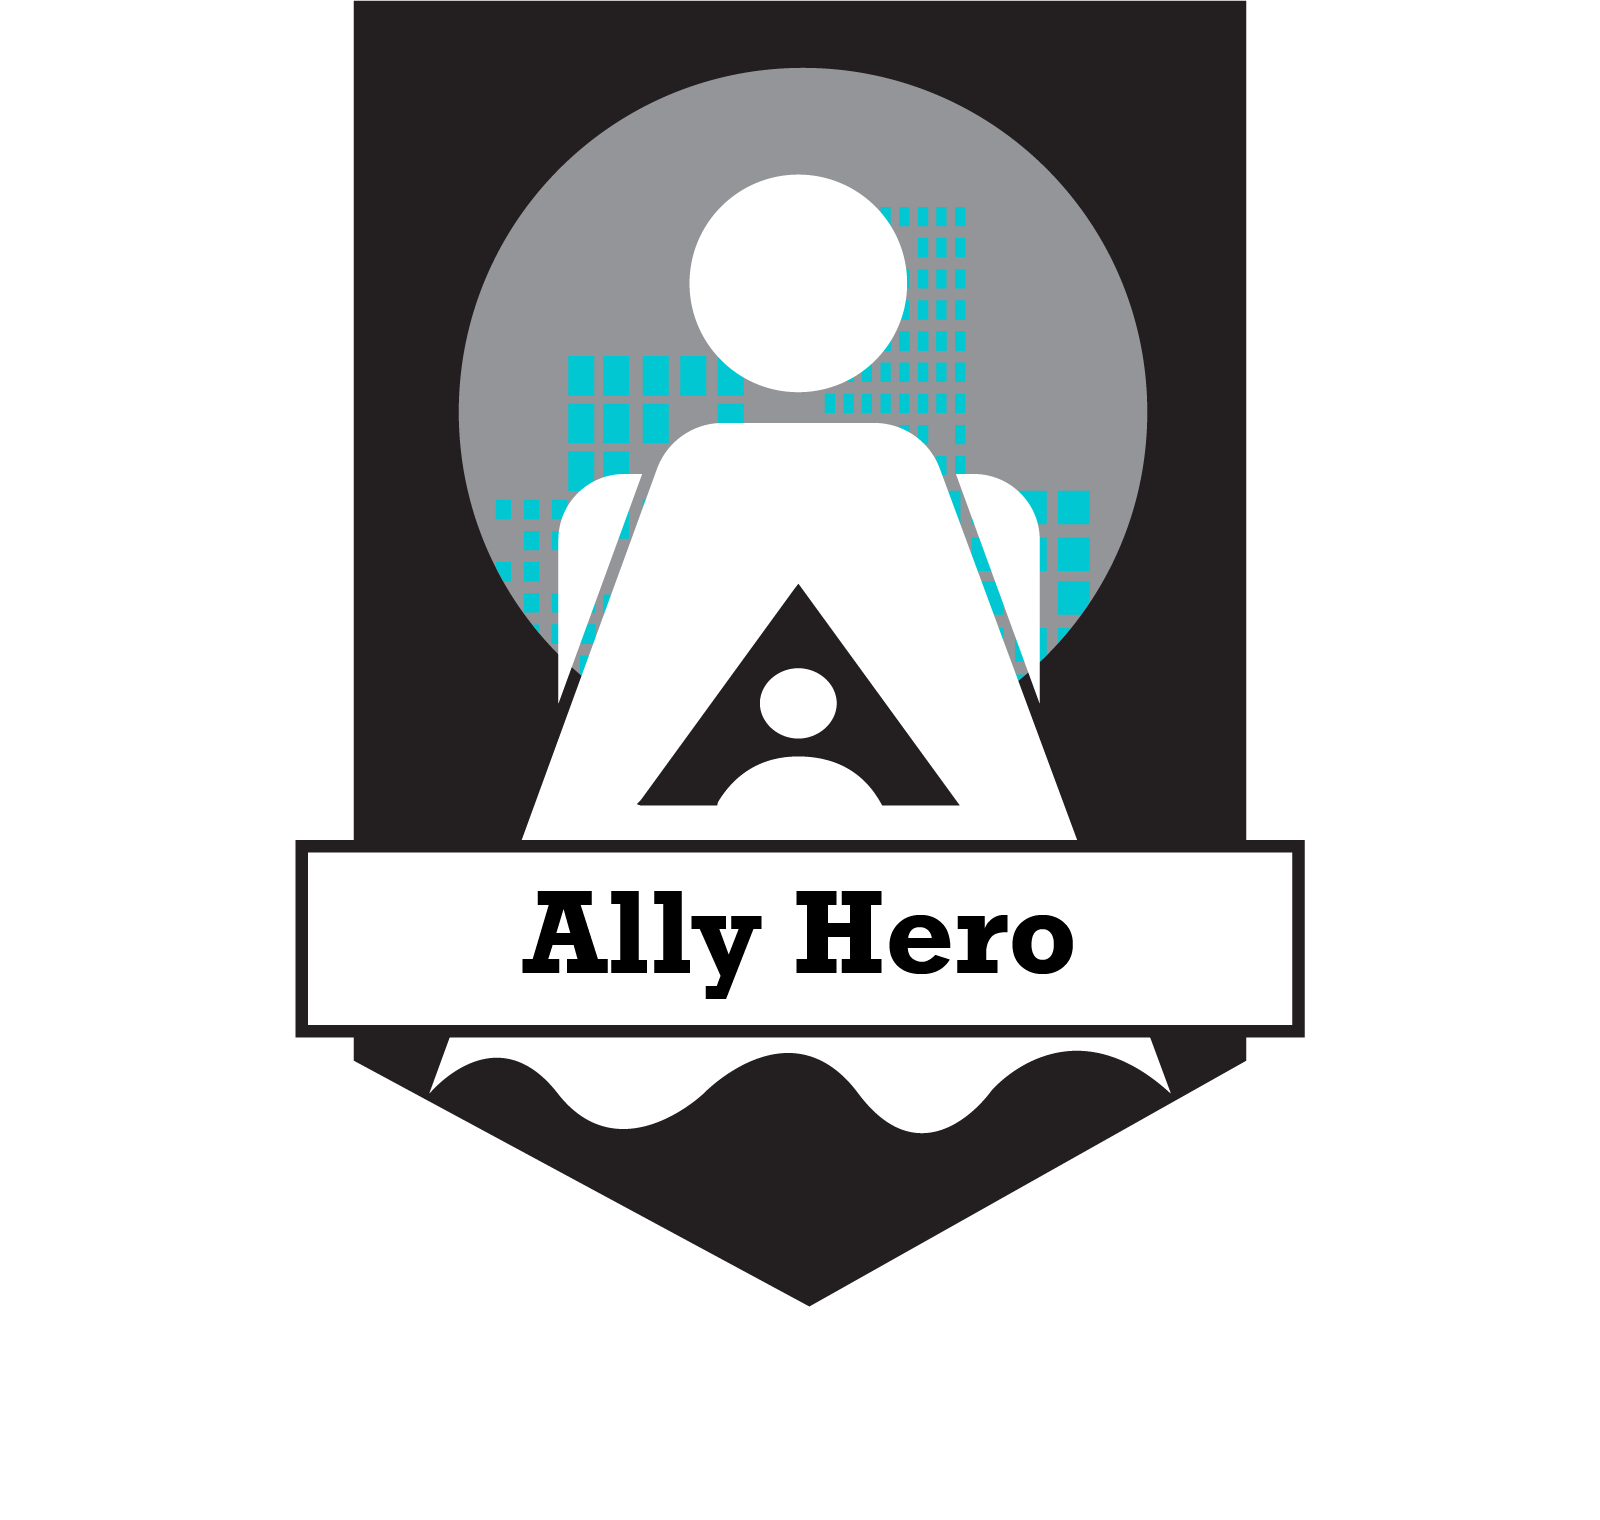 Ally Hero badge includes an icon of a caped super hero with the Ally logo on the cape